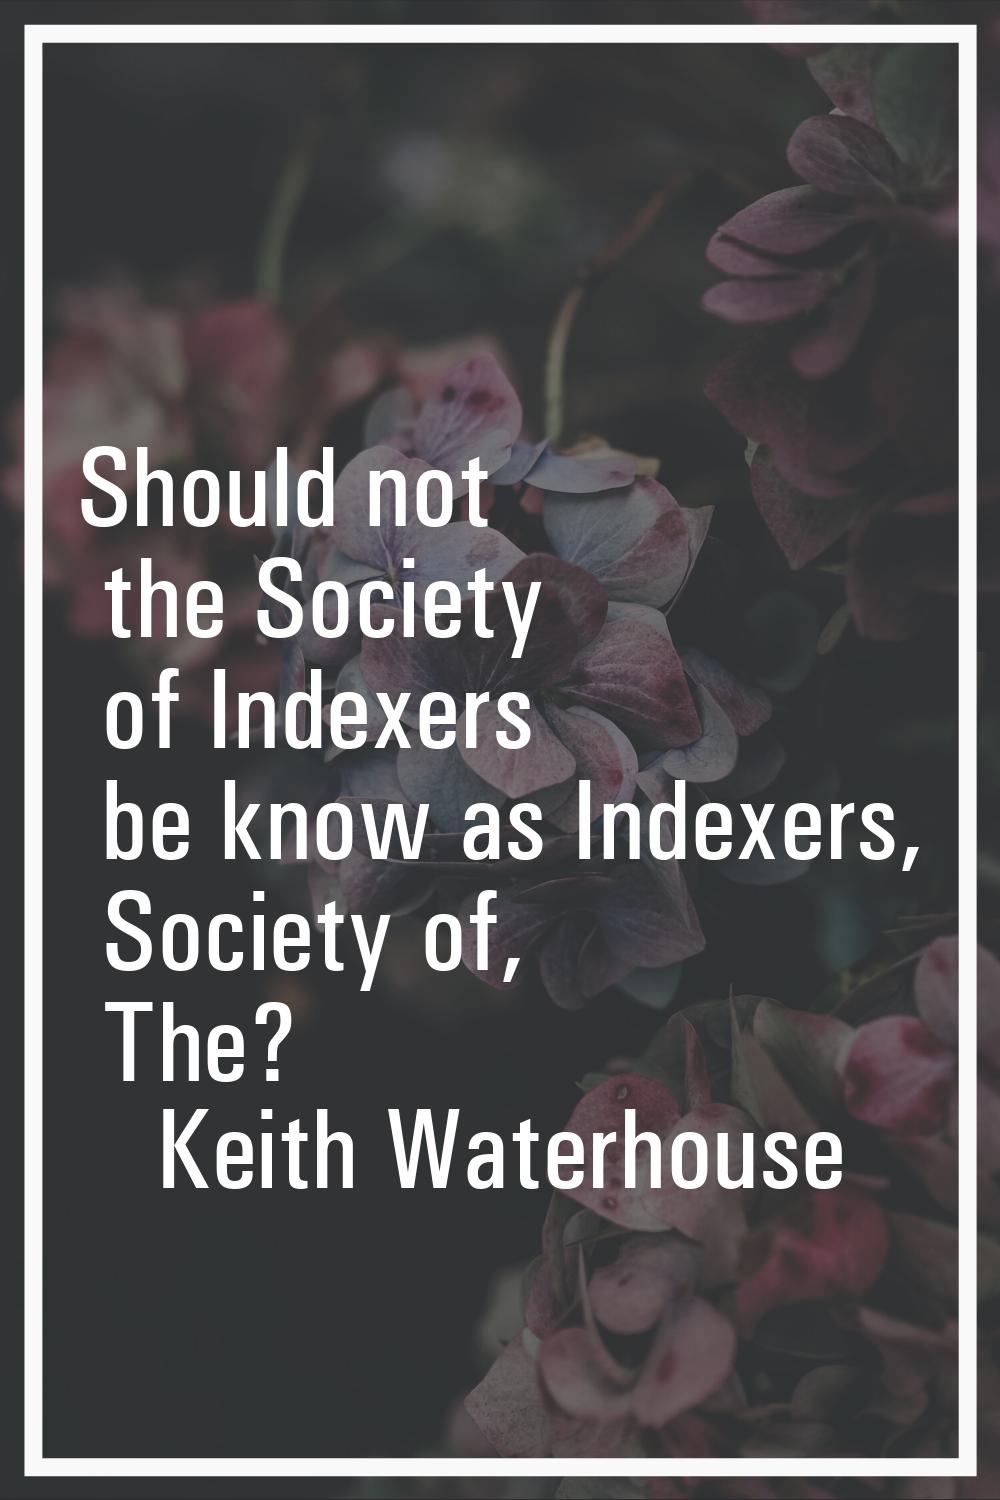 Should not the Society of Indexers be know as Indexers, Society of, The?